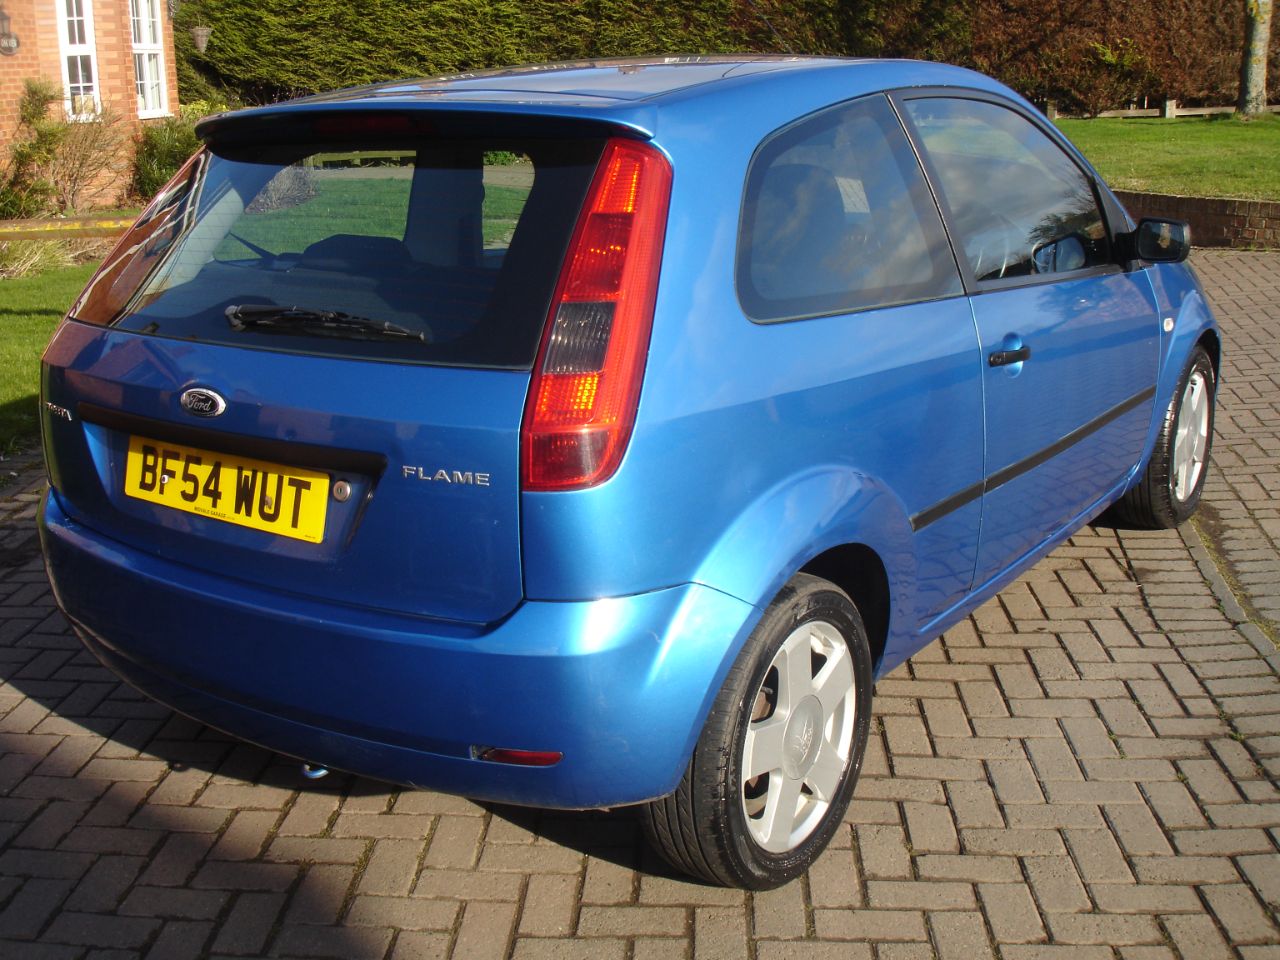 2004 Ford Fiesta 1.4 Flame 3dr